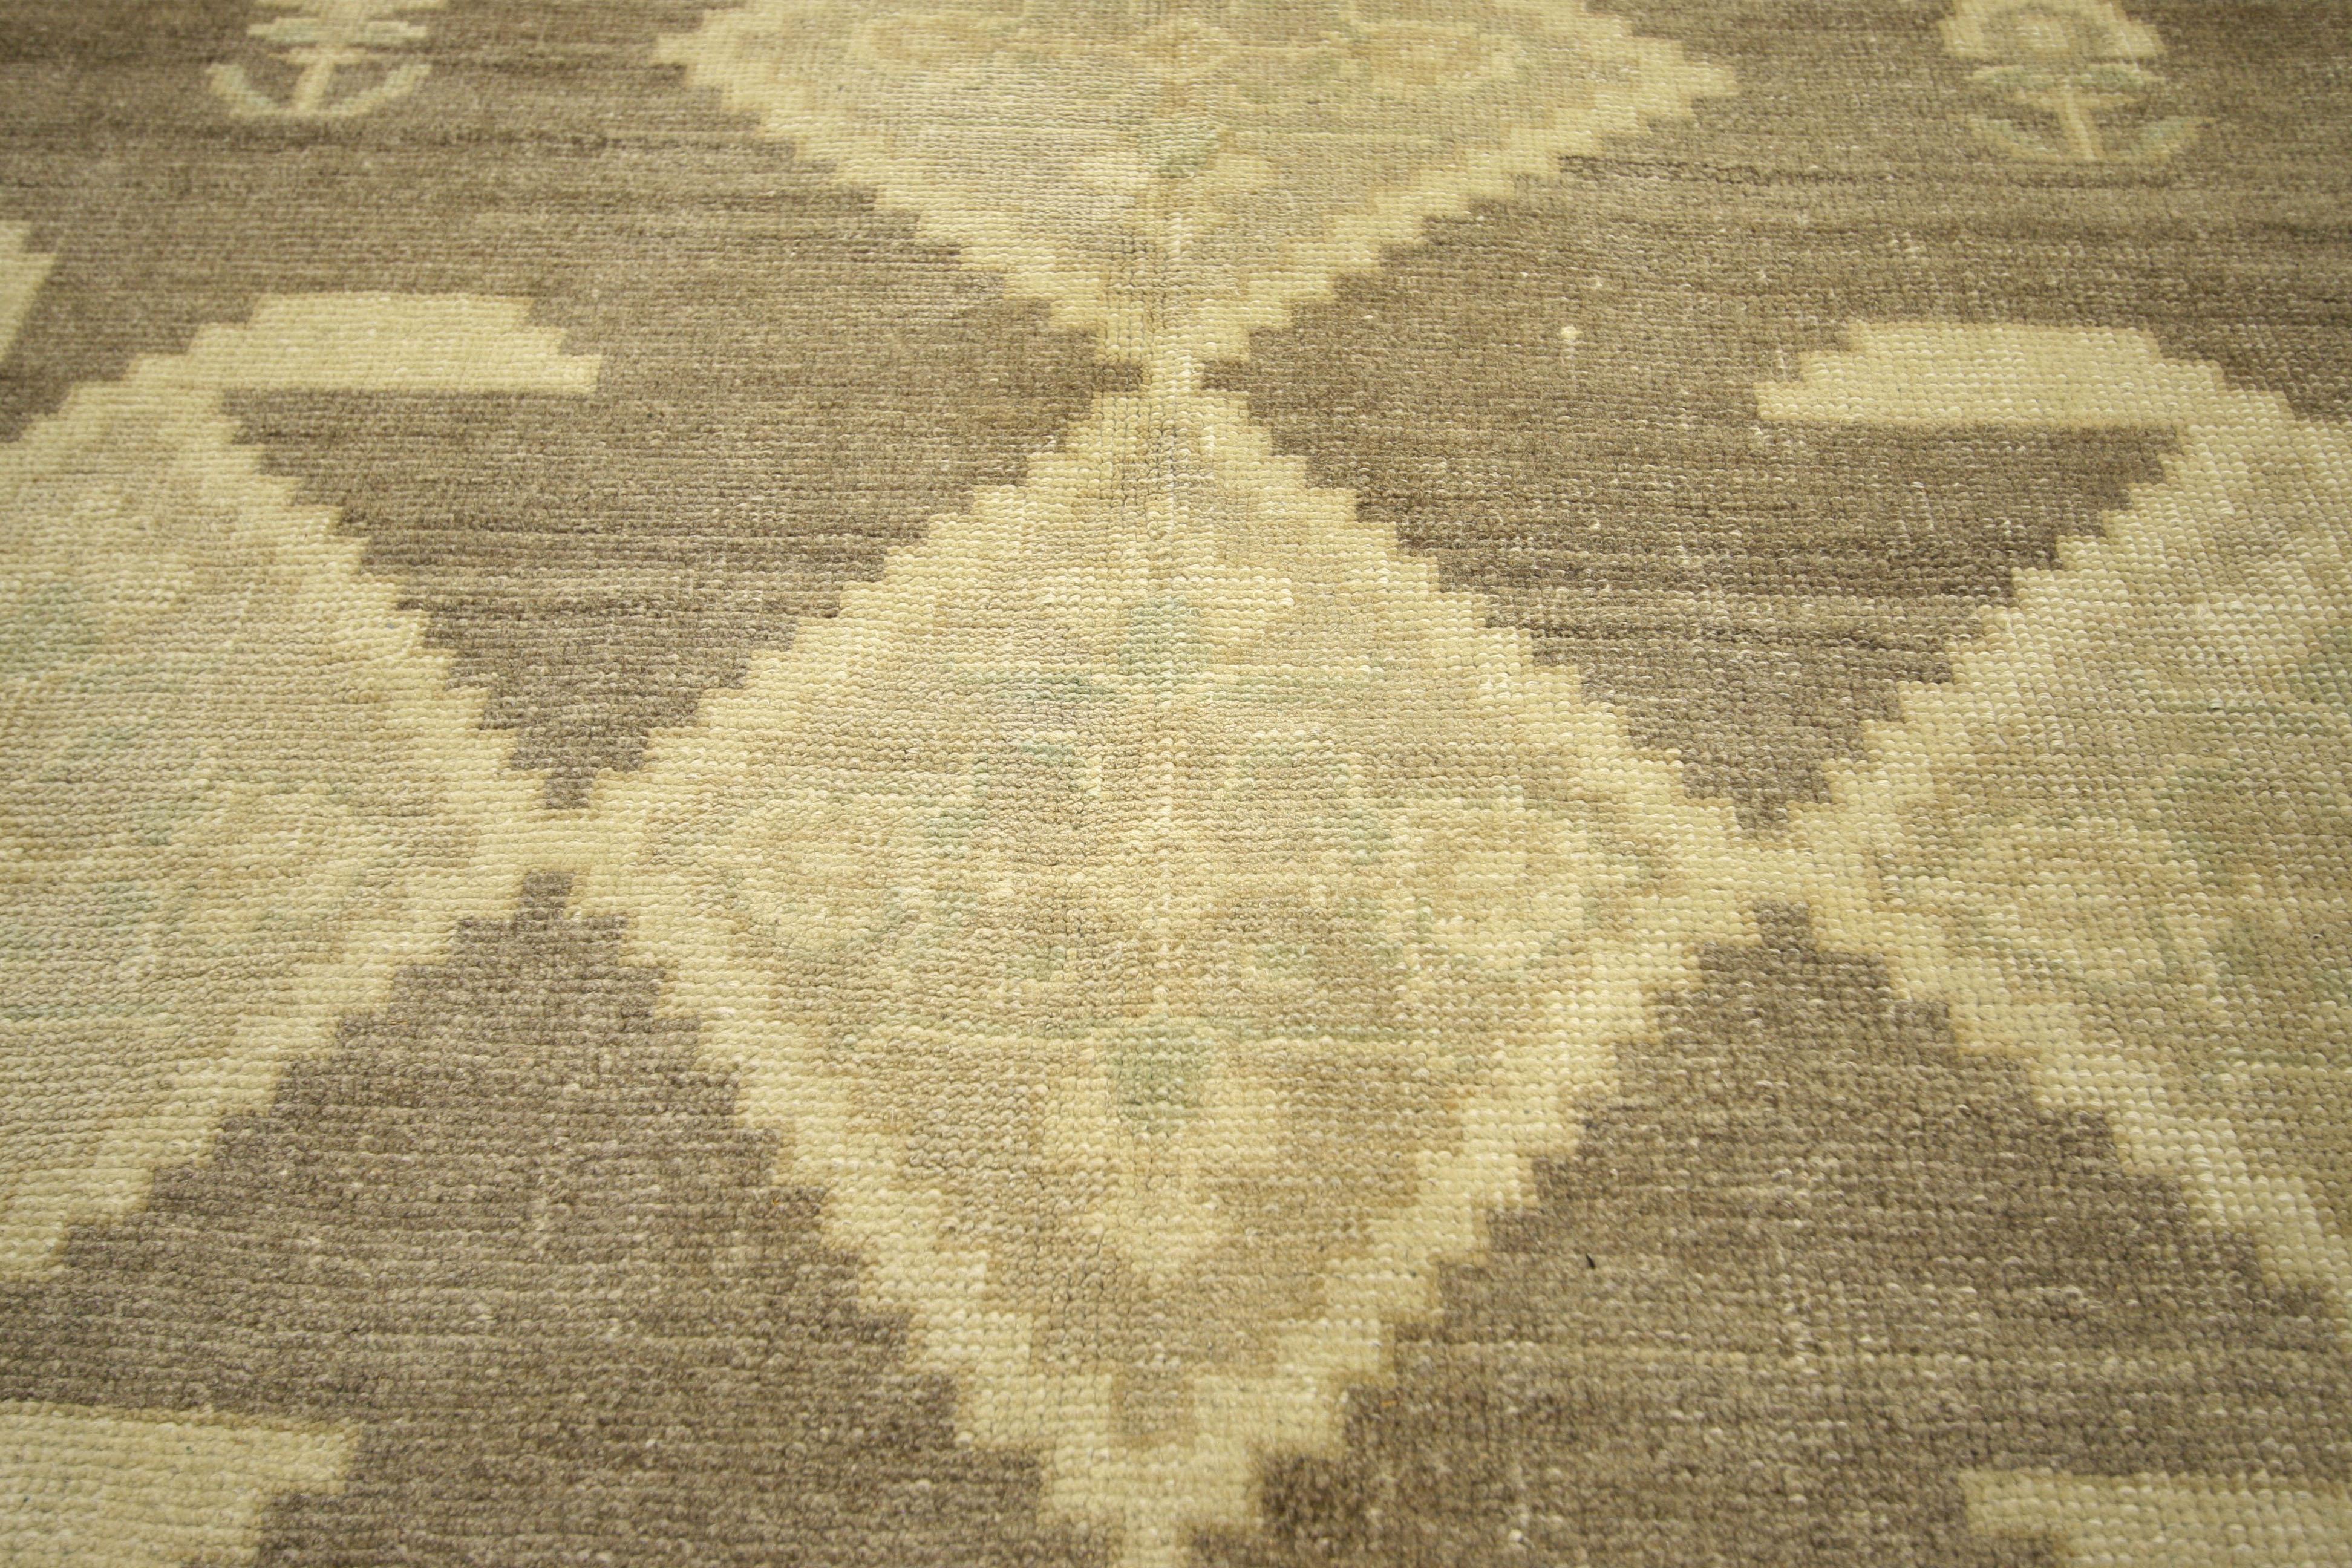 Vintage Turkish Oushak Rug with Swedish Farmhouse Style, Wide Hallway Runner In Good Condition For Sale In Dallas, TX